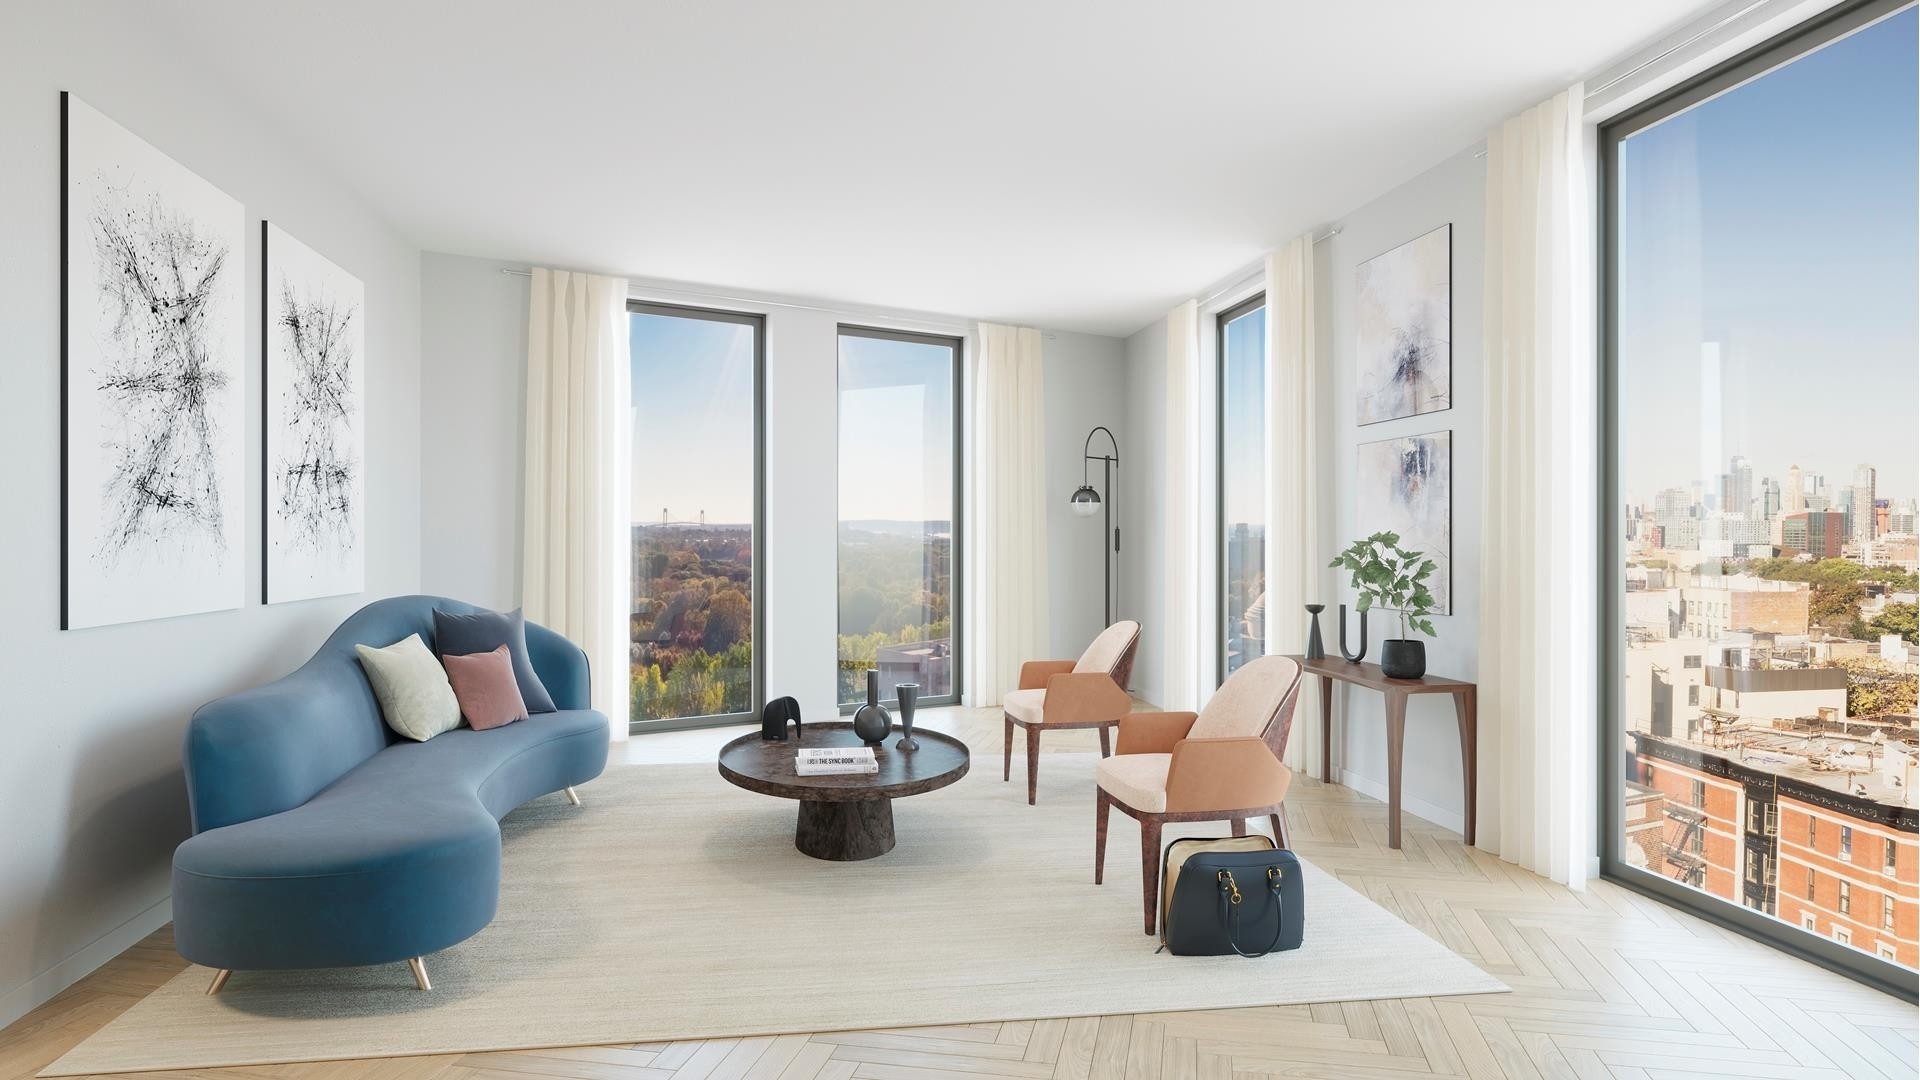 Condominium for Sale at The Museum House, 805 WASHINGTON AVE, 3D Prospect Heights, Brooklyn, New York 11238